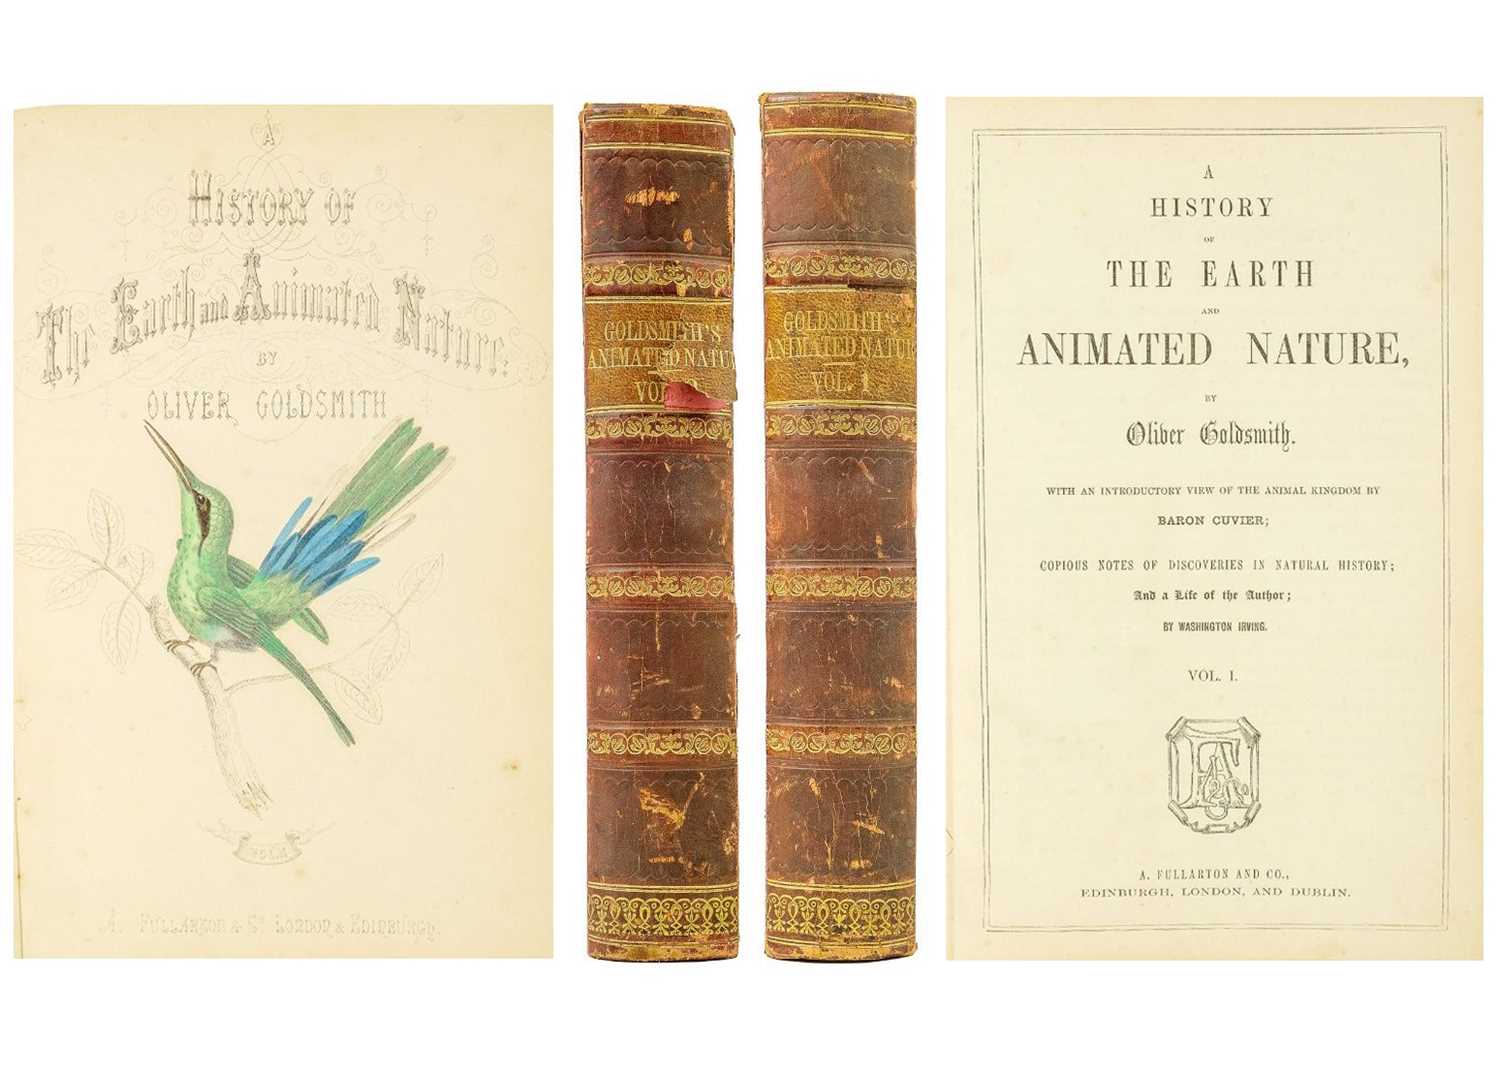 (Natural History) GOLDSMITH, Oliver 'A History of the Earth and Animated Nature,'